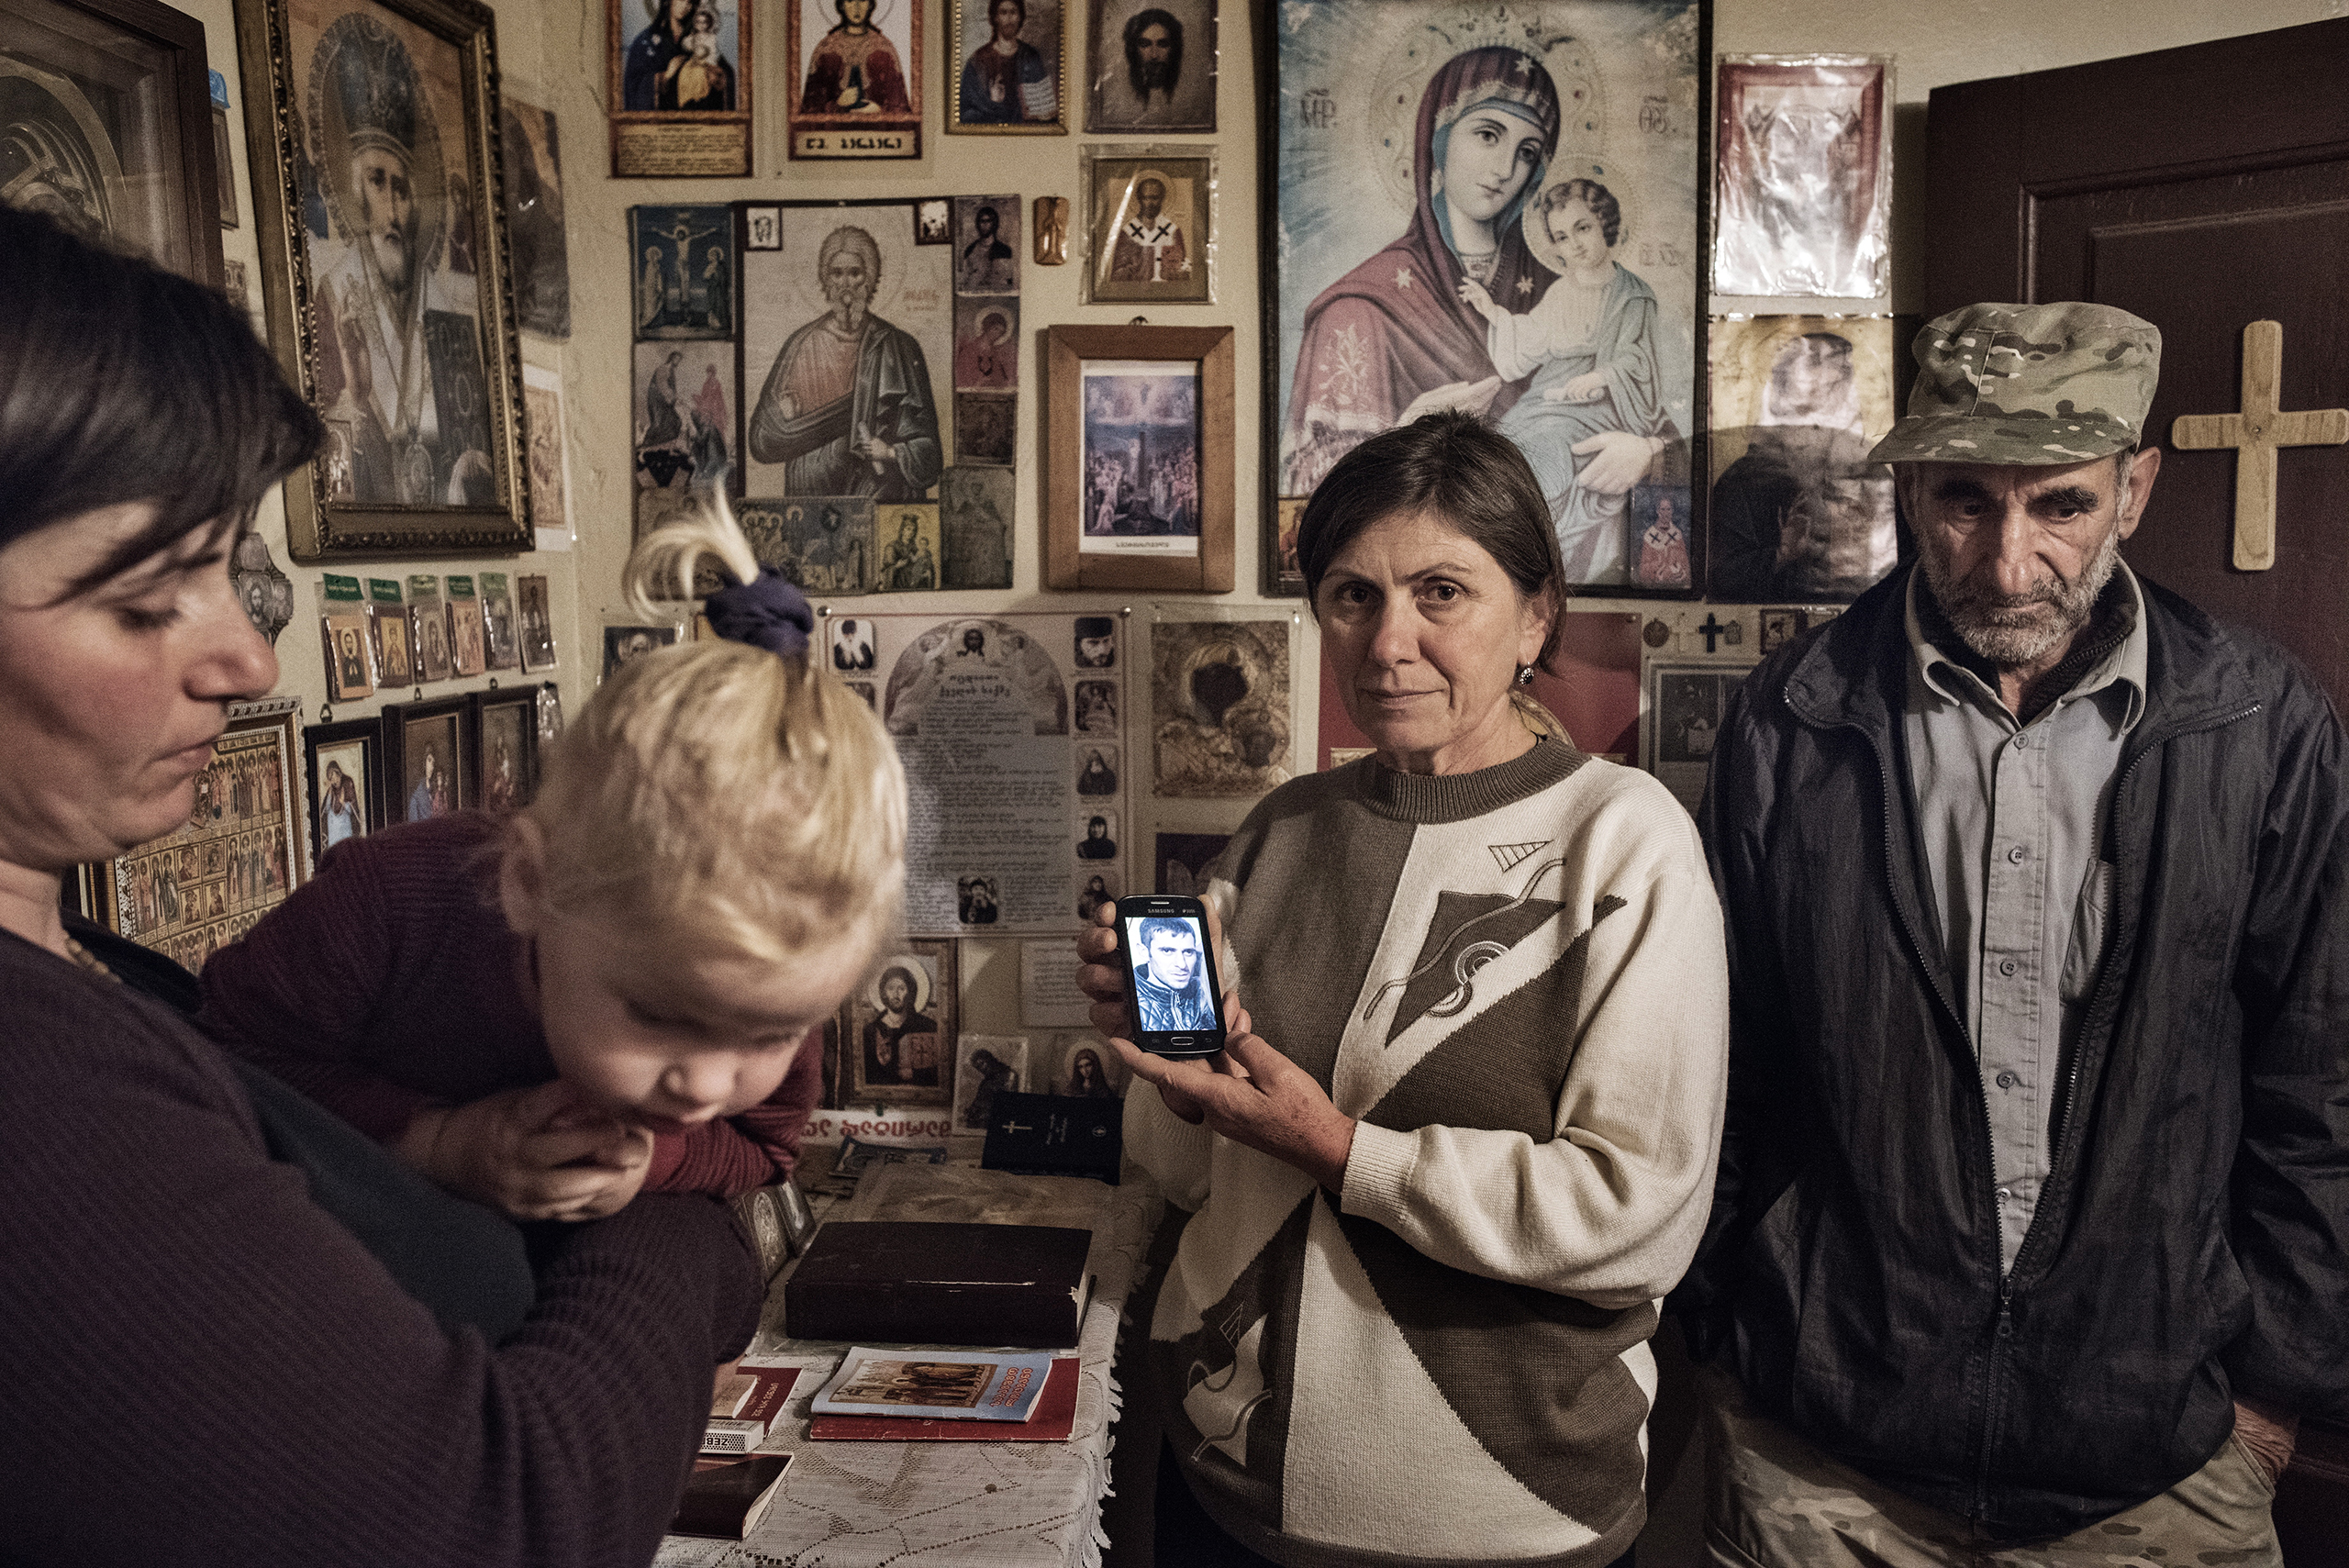 Tamila Chaduneli holds a picture of her son Amiran, who was caught attempting to sell highly radioactive uranium in Georgia (Yuri Kozyrev—Noor for TIME)